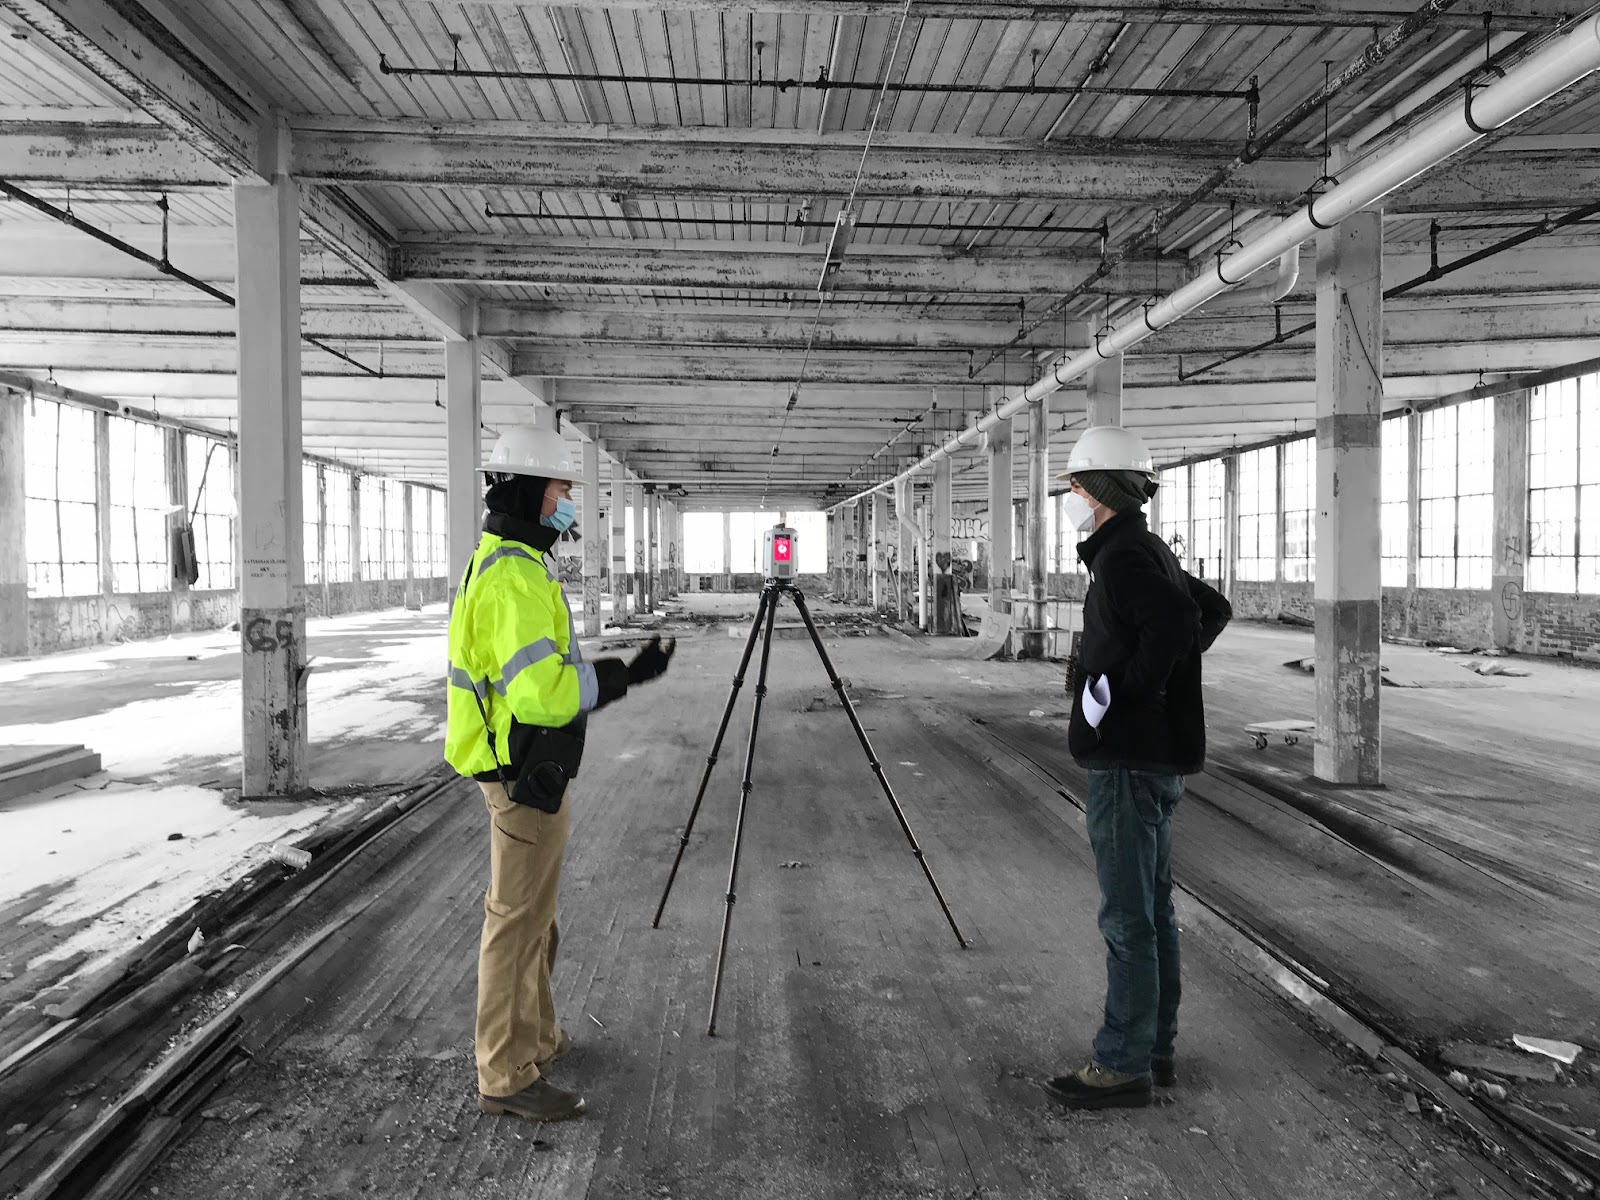 Our team capturing high-quality, accurate data on-site utilizing our state-of-the-art Leica RTC360